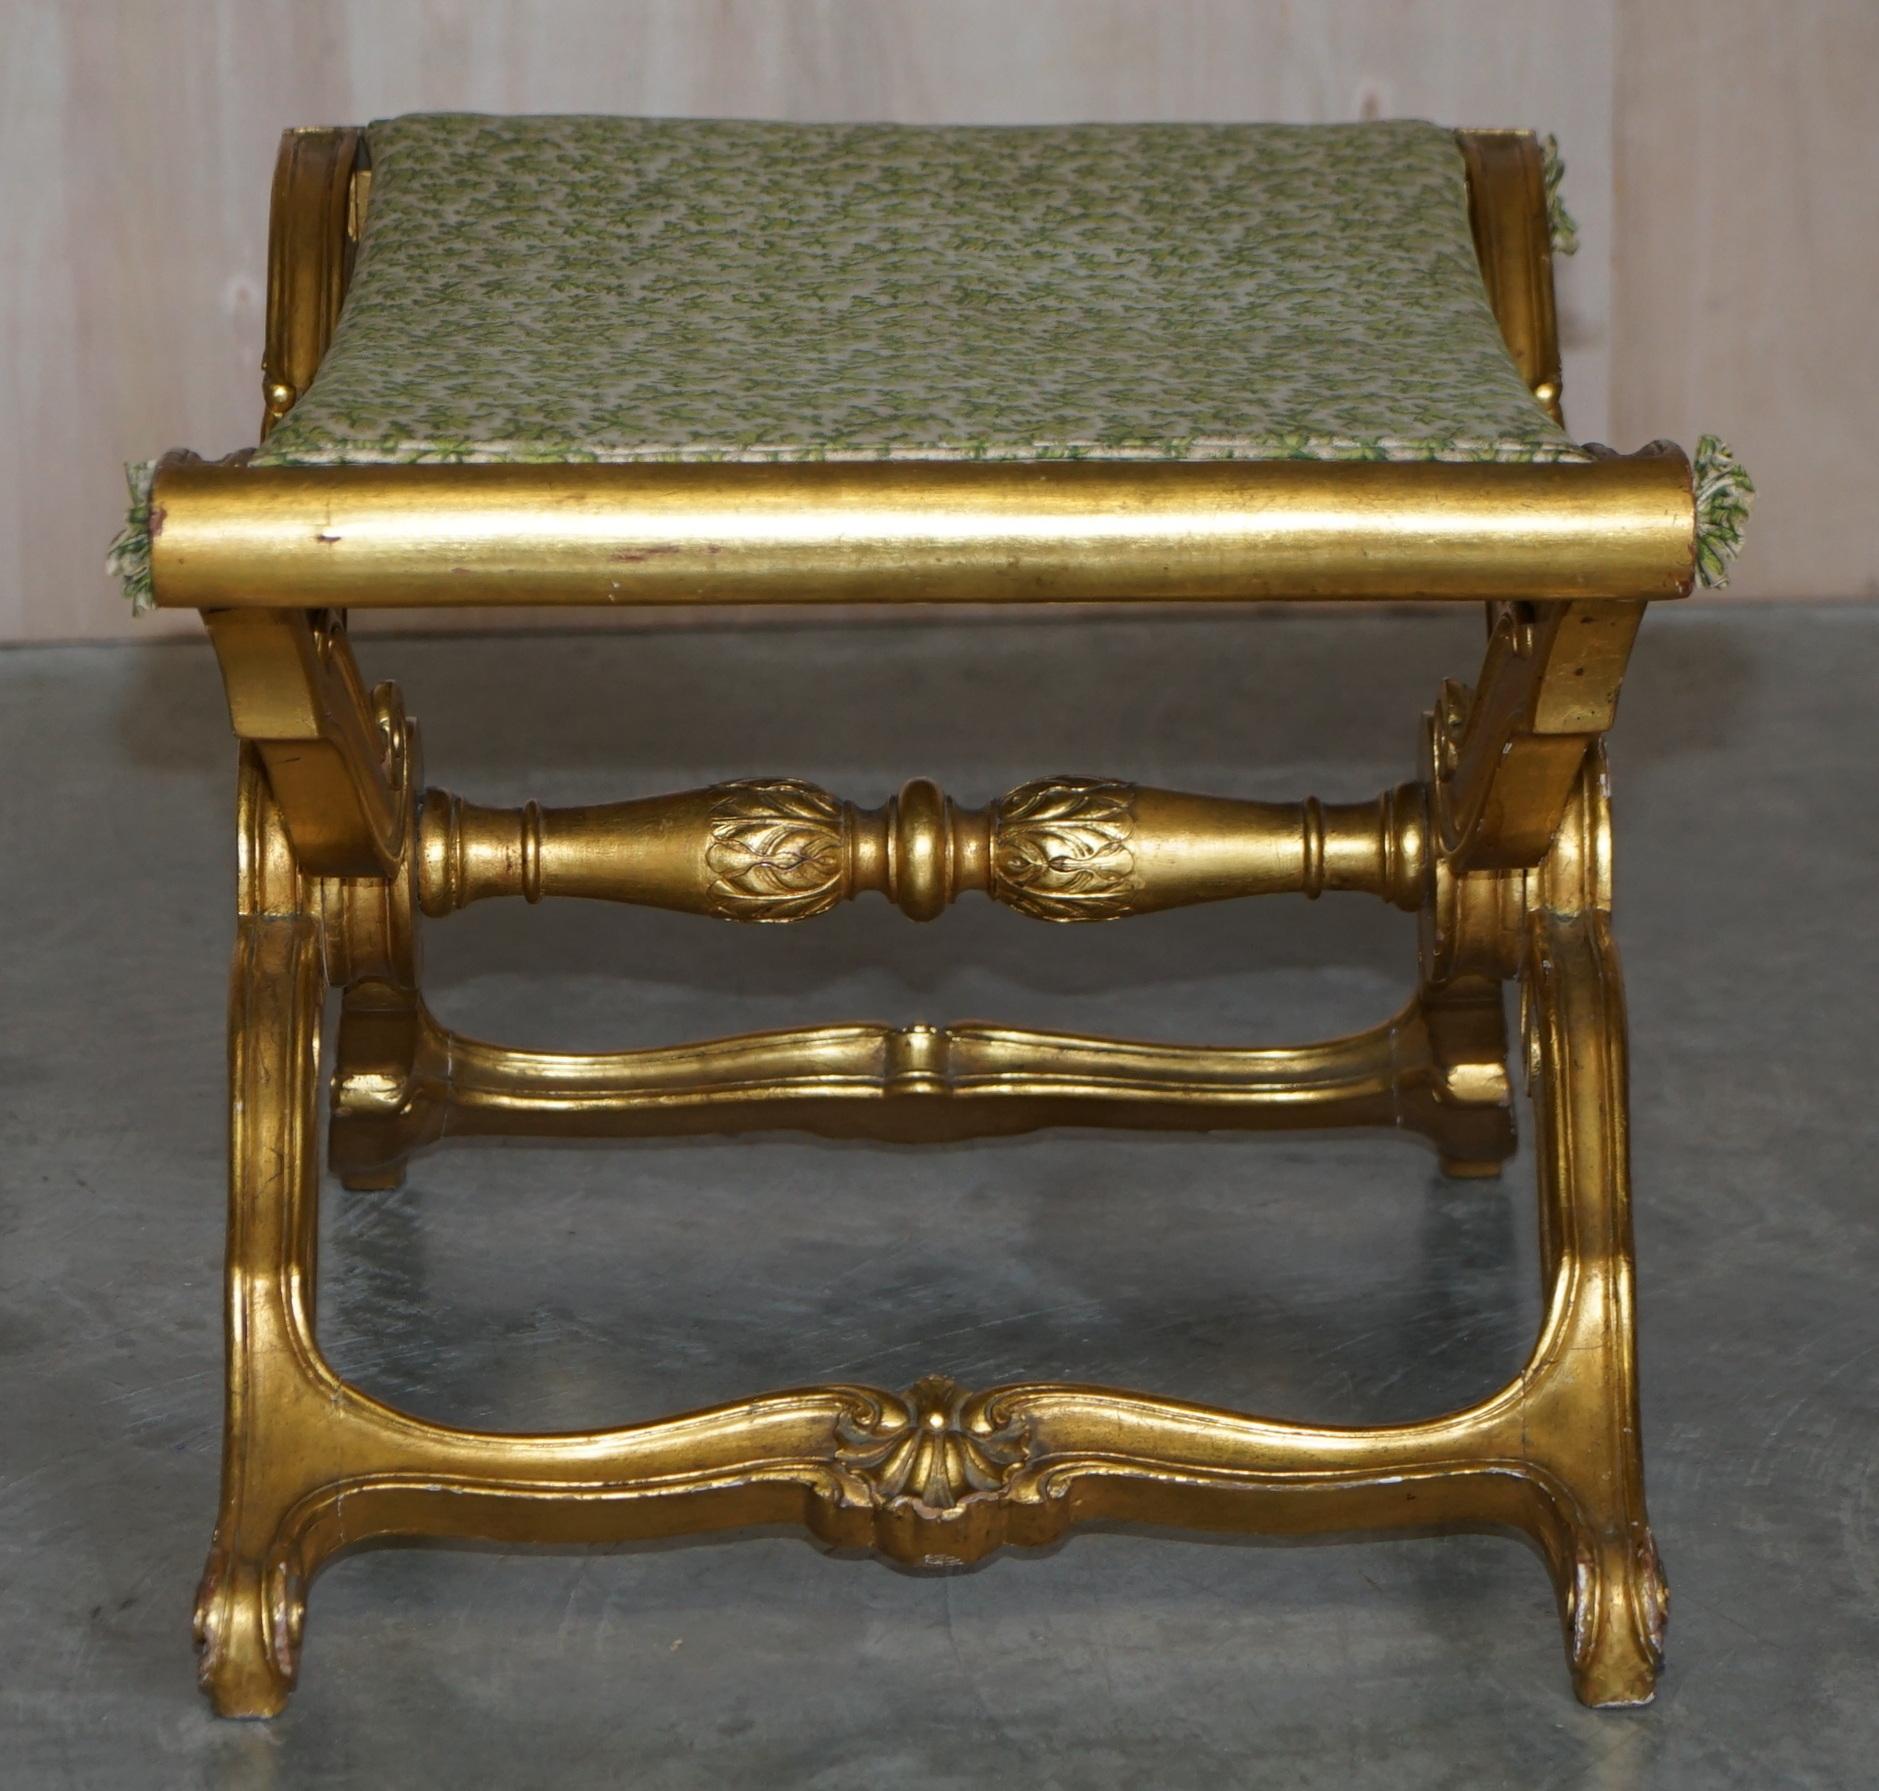 Stunning Antique 19th Century Hand Carved Giltwood Pliant x Frame Folding Stool For Sale 5